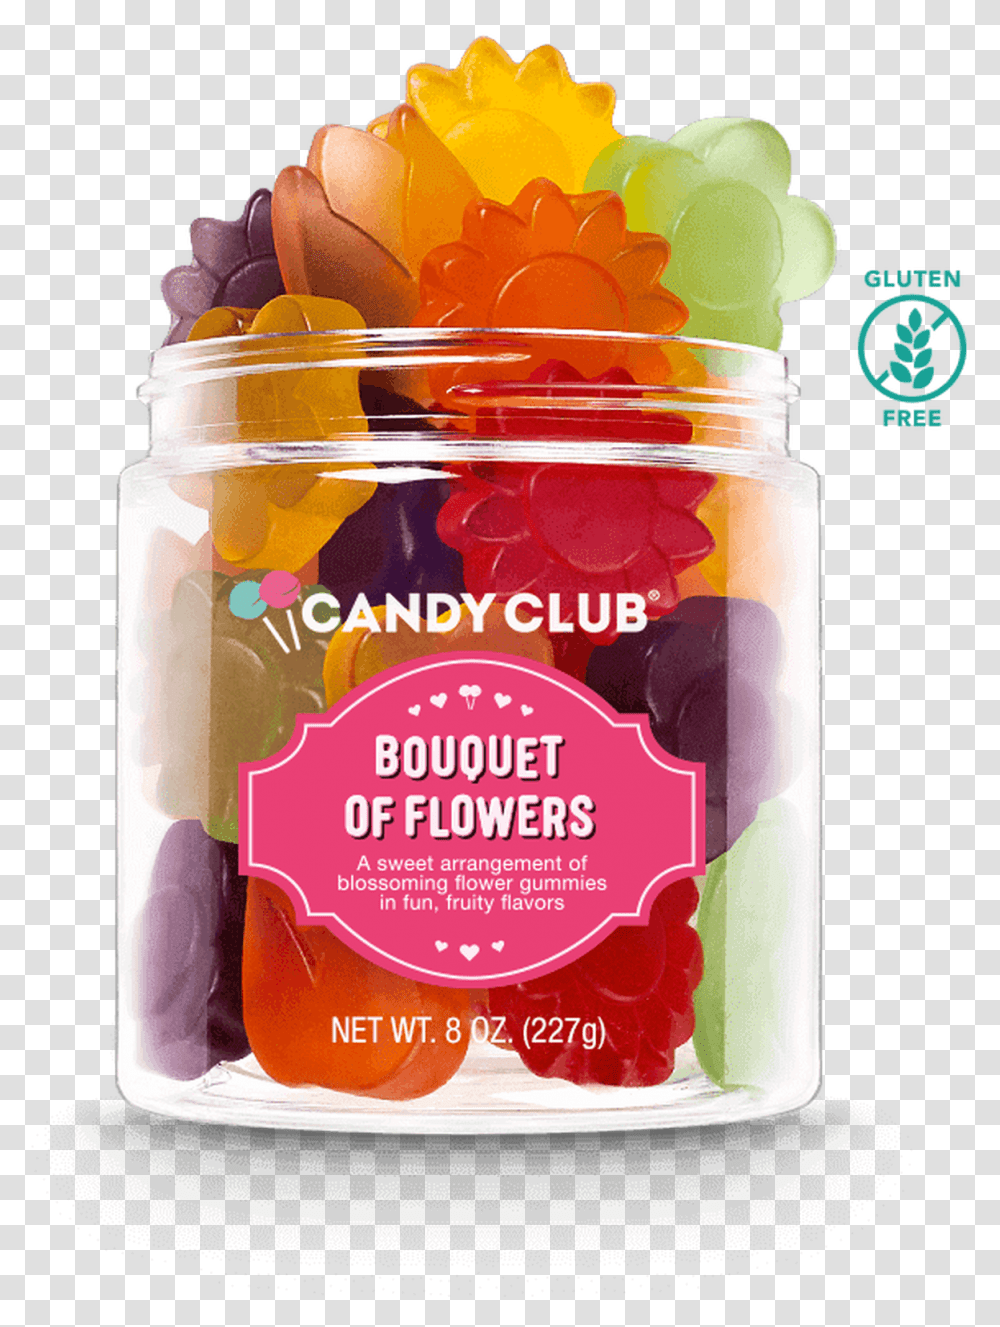 A Cup Of Bouquet Of Flowers Candy Flower Bouquet, Plant, Sweets, Food, Confectionery Transparent Png